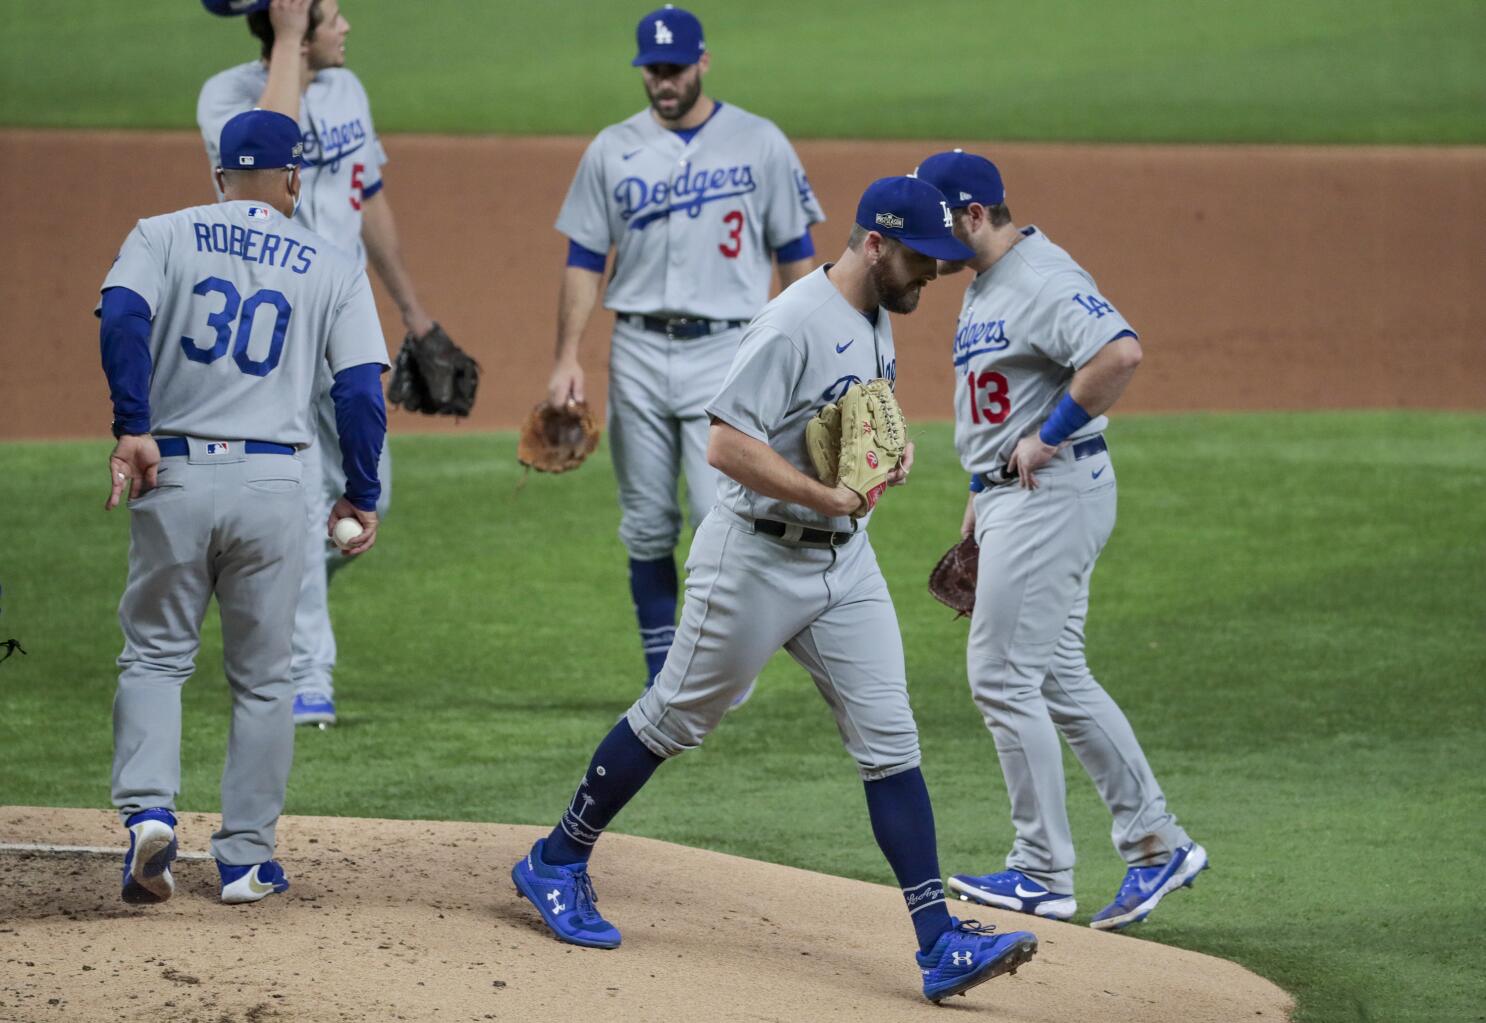 Dodgers vs. Padres schedule, starting pitching matchups - True Blue LA